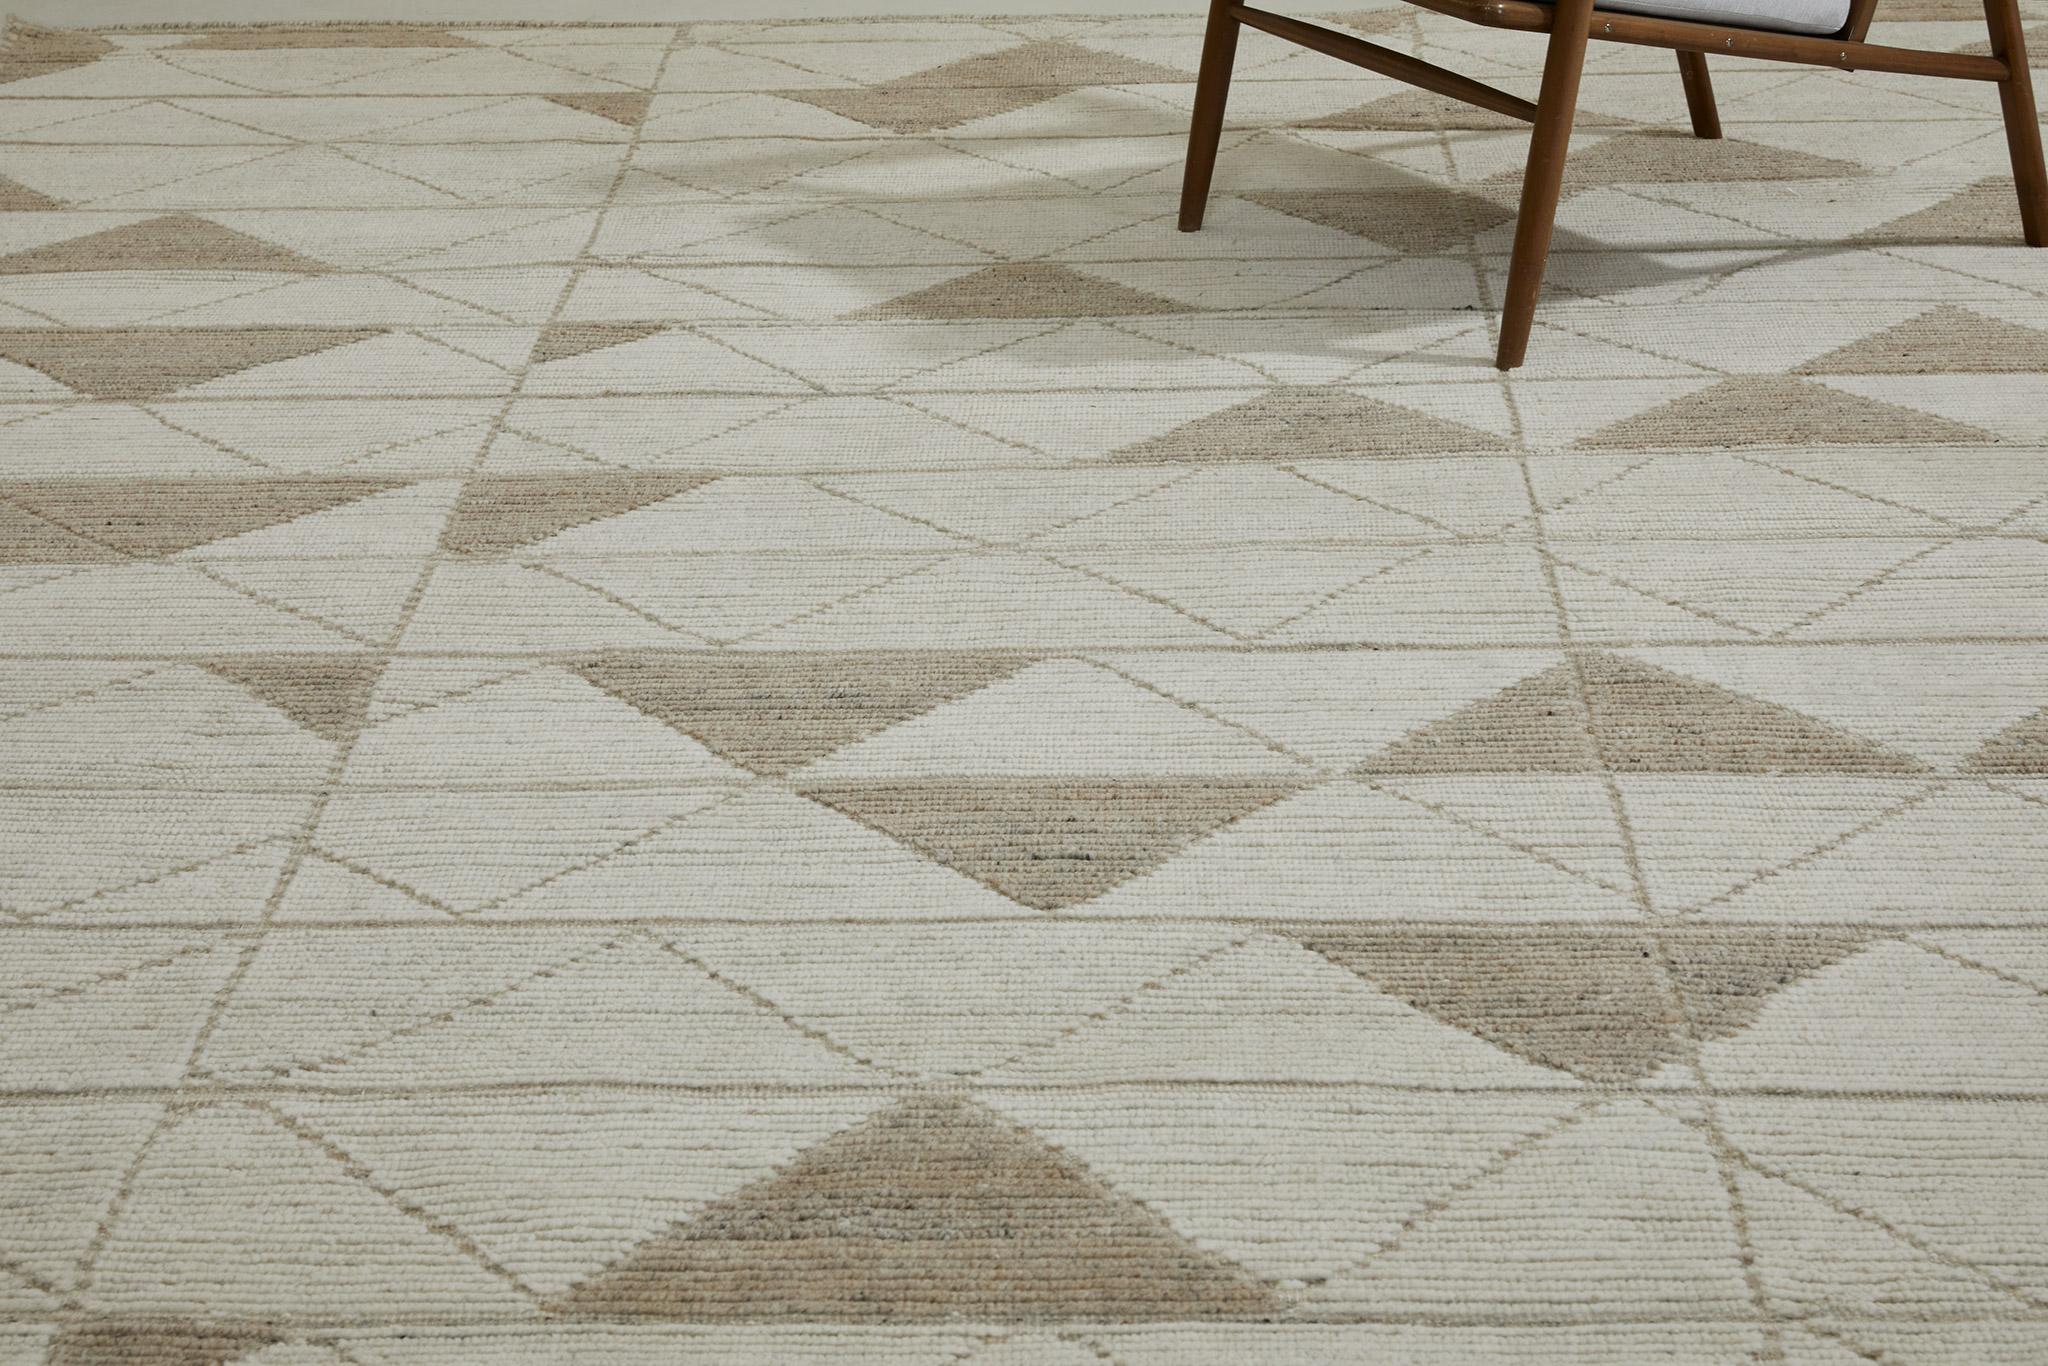 Pinotage’s triangle riff plays out in trim pile with contrasting flatweave lines.

Here in ivory with taupe accents.

The Estancia Collection by Mehraban is a group of casually sophisticated rugs in a versatile array of upbeat colorways and design